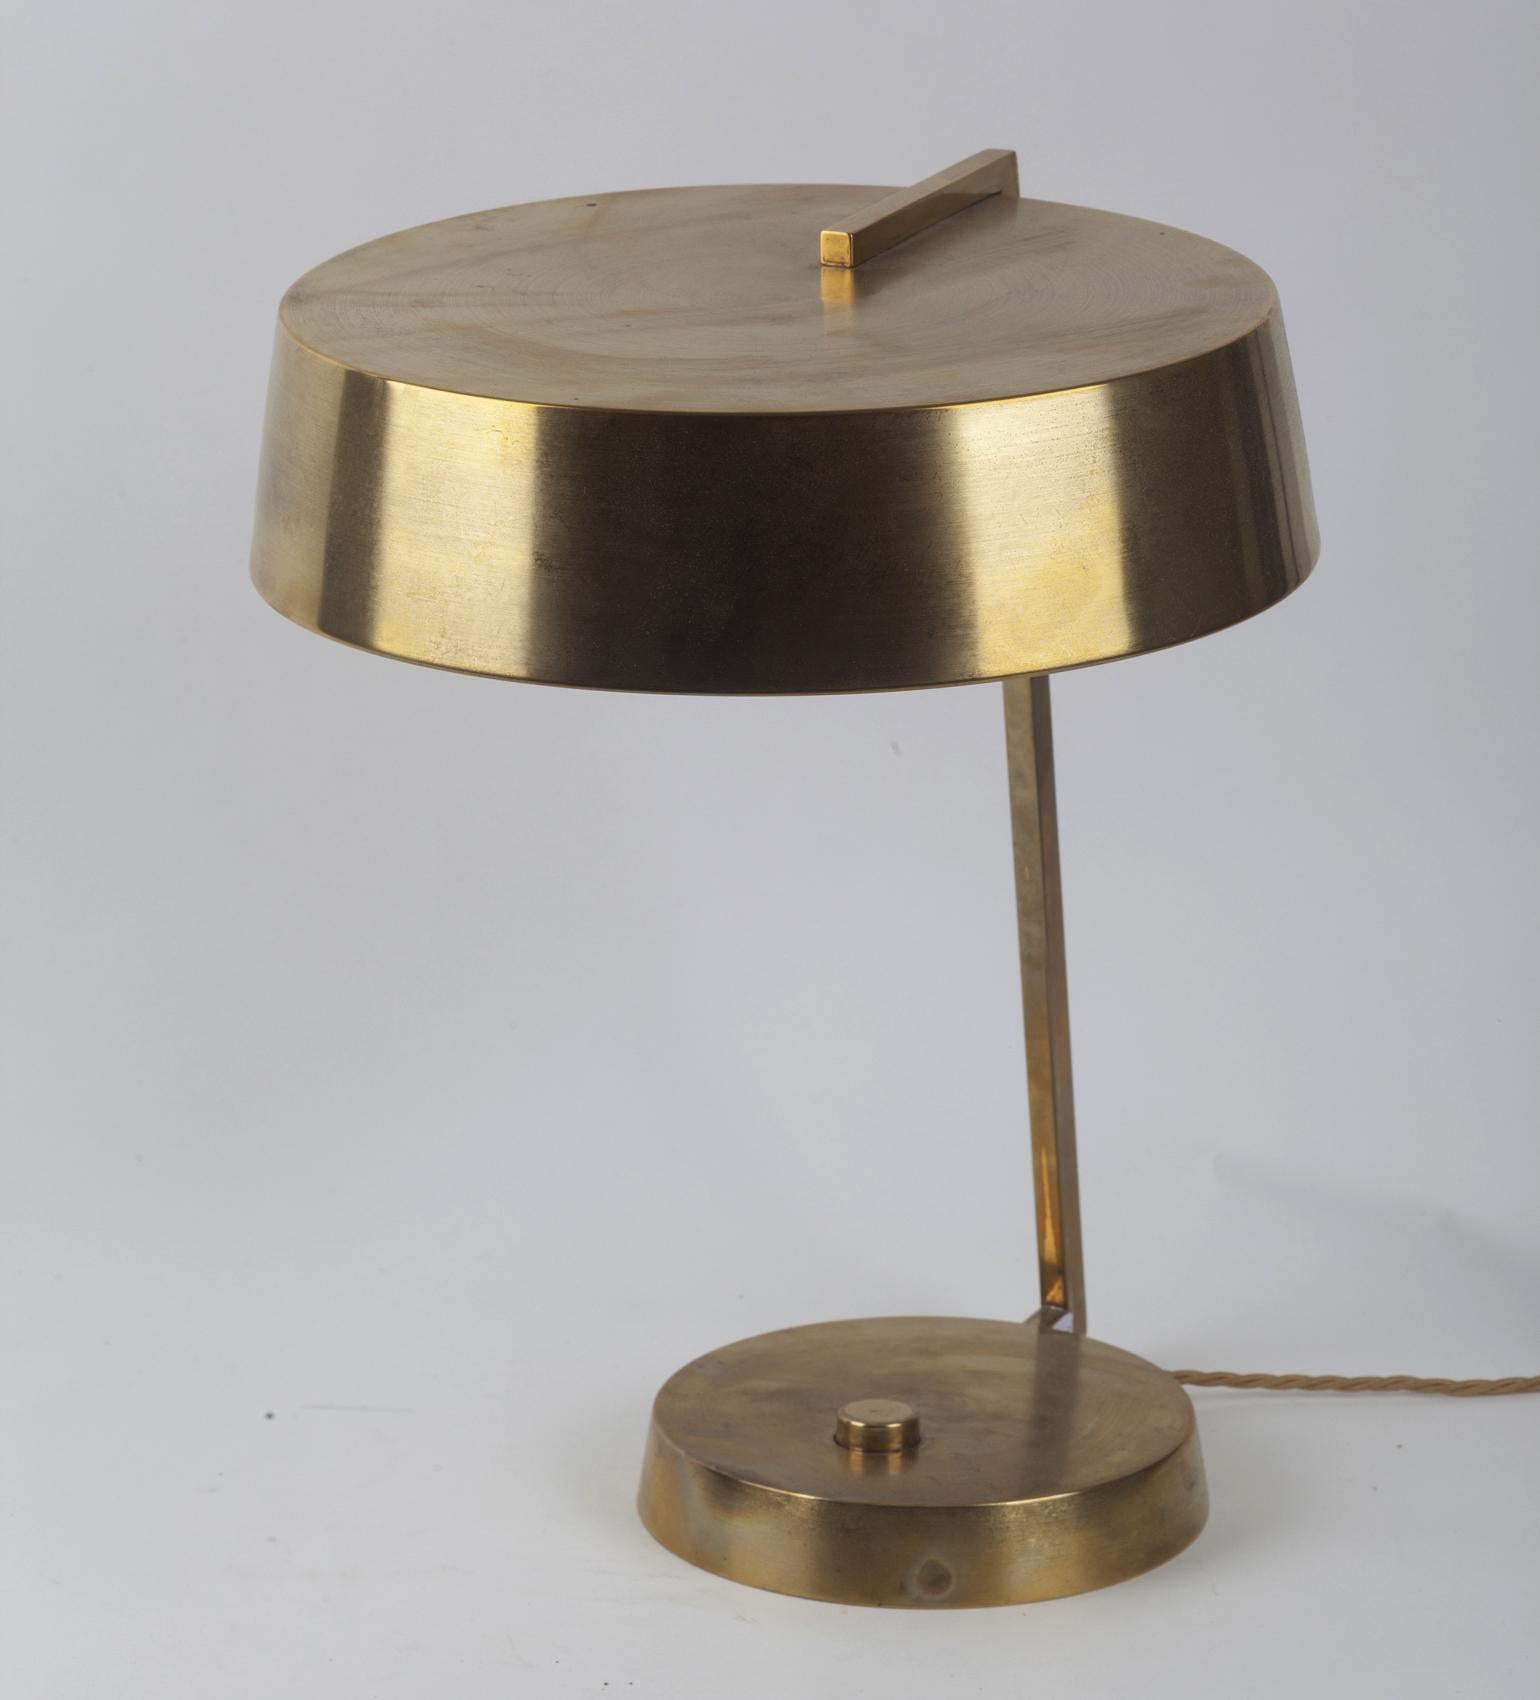 Italian 1950s table or desk lamp by Stilux, Milano. It has a round brass shade supported by a brass arm and round brass base.